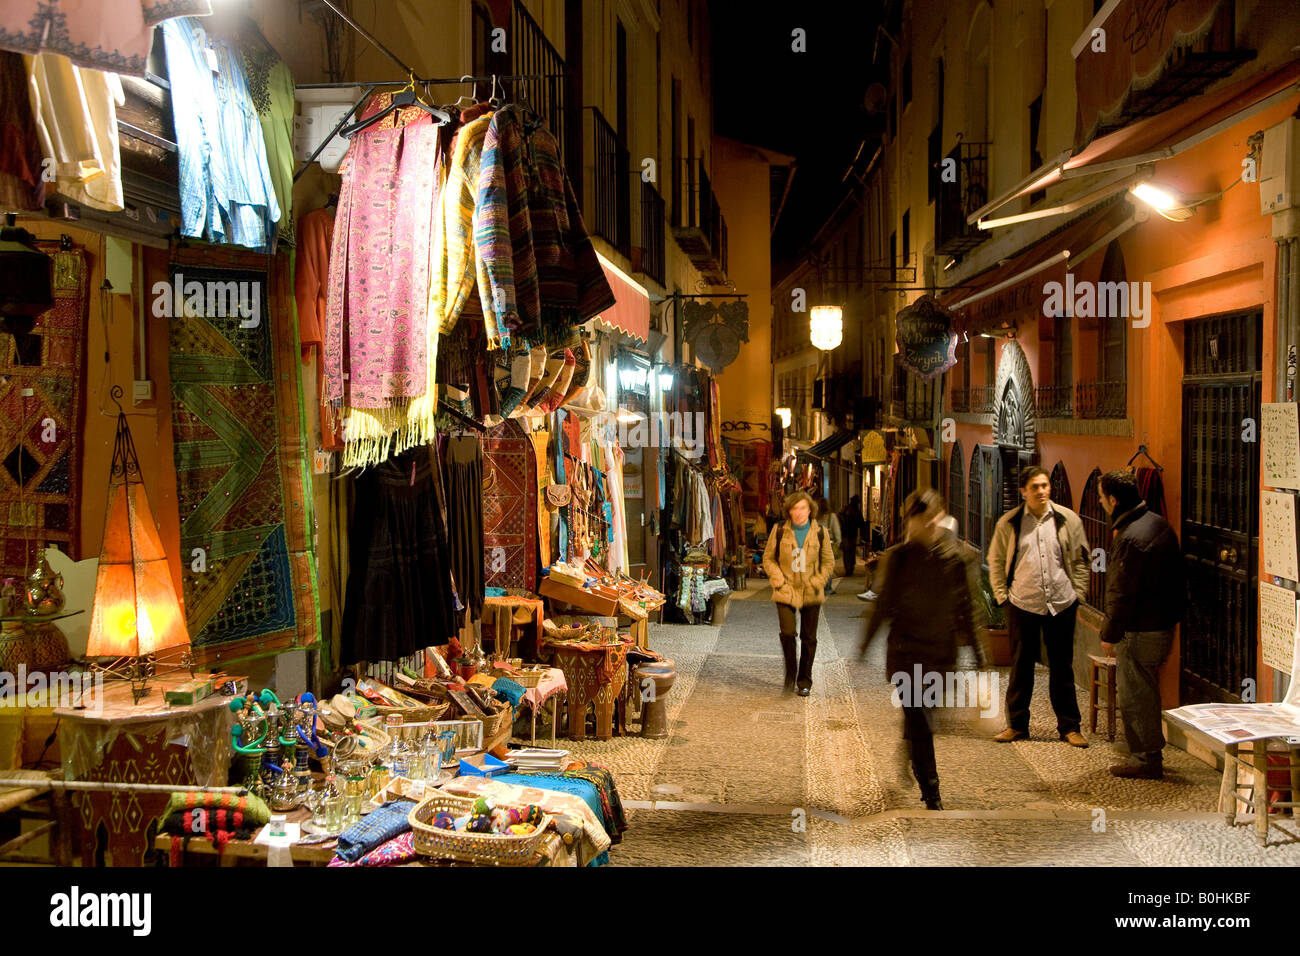 Teahouses, tourists and souvenir shops selling Moroccan handicrafts at night in the colourful Caldereria Nueva street, Granada, Stock Photo